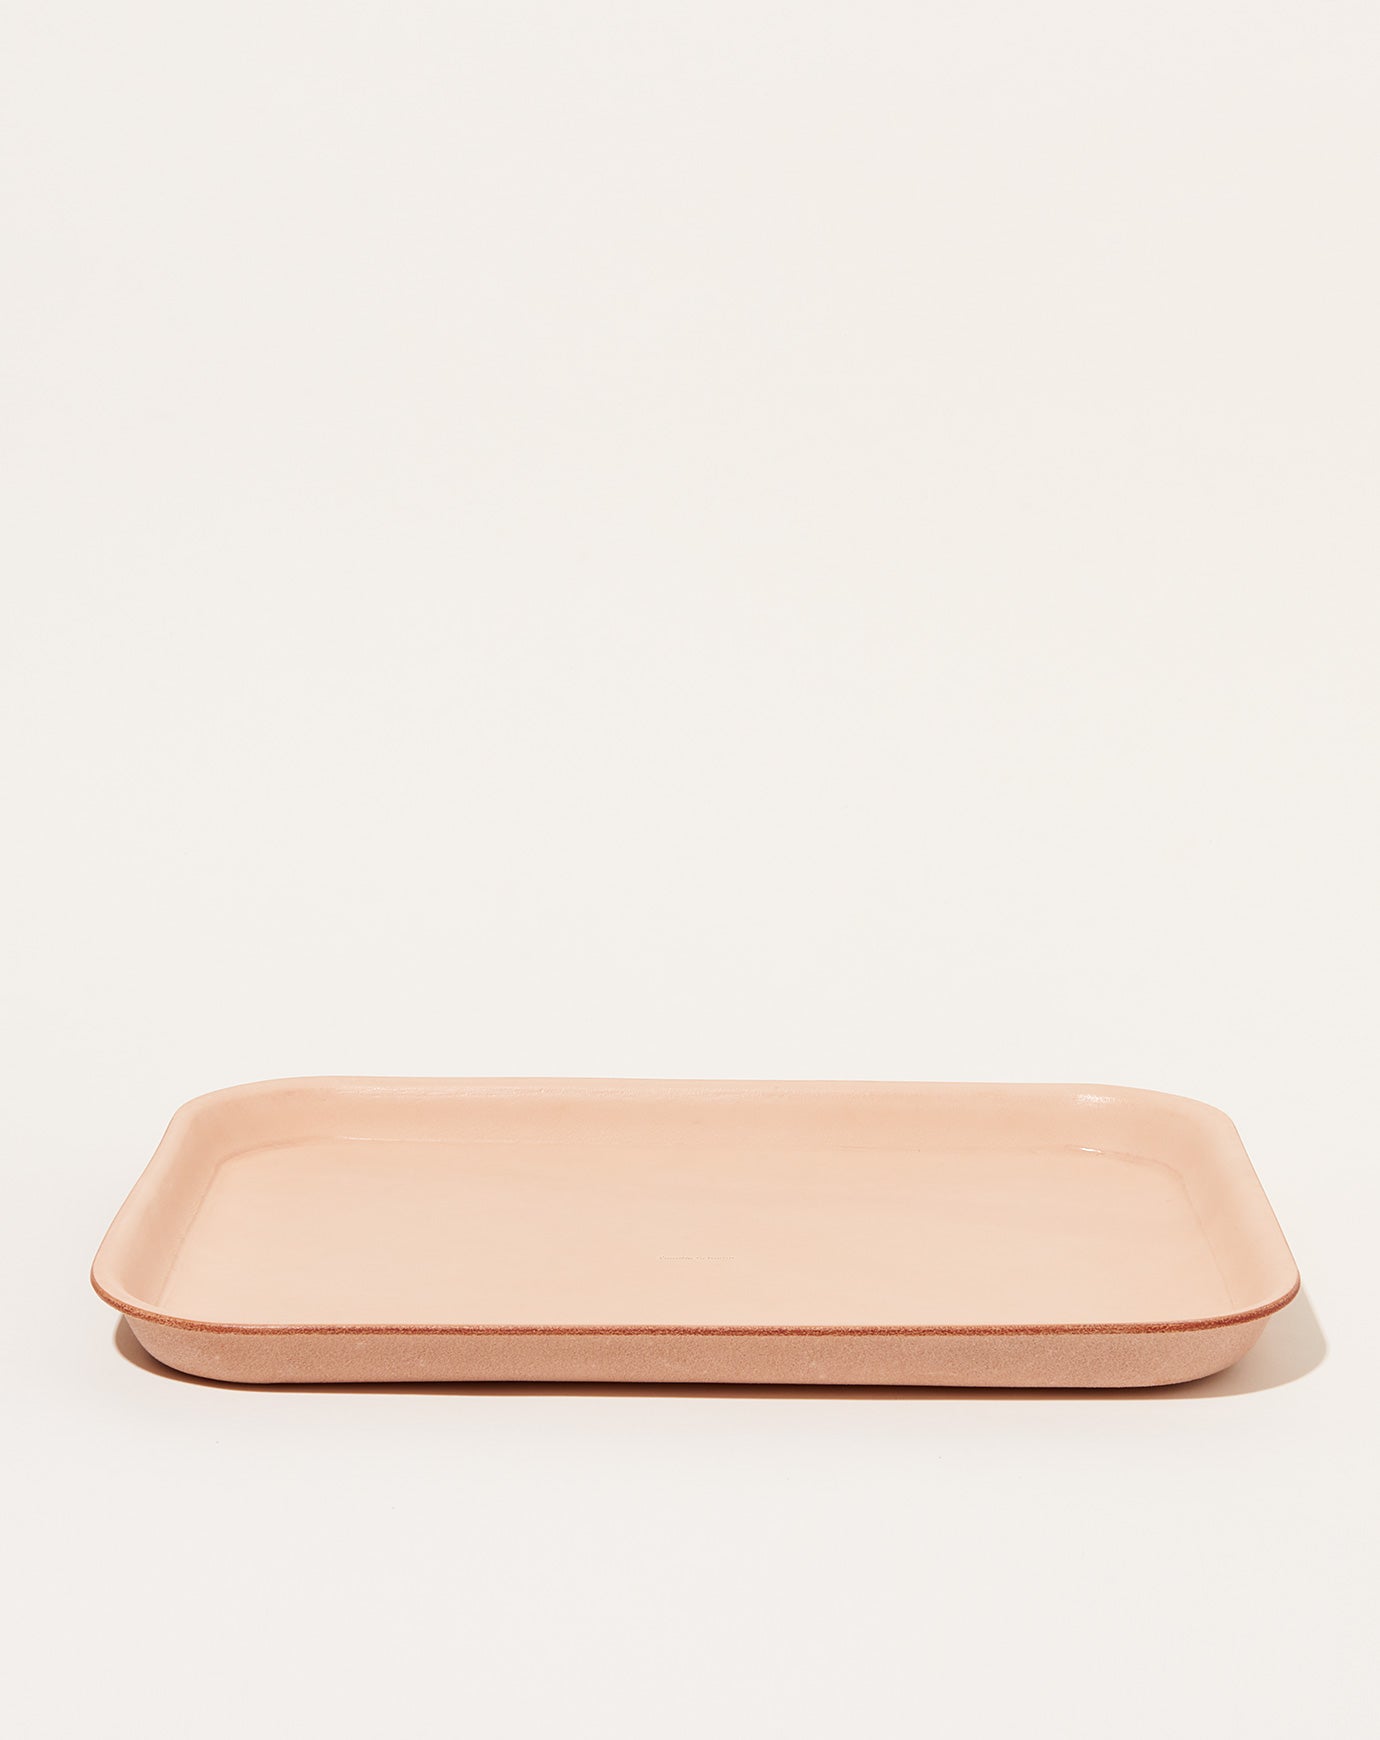 Hender Scheme Leather Tray L in Natural